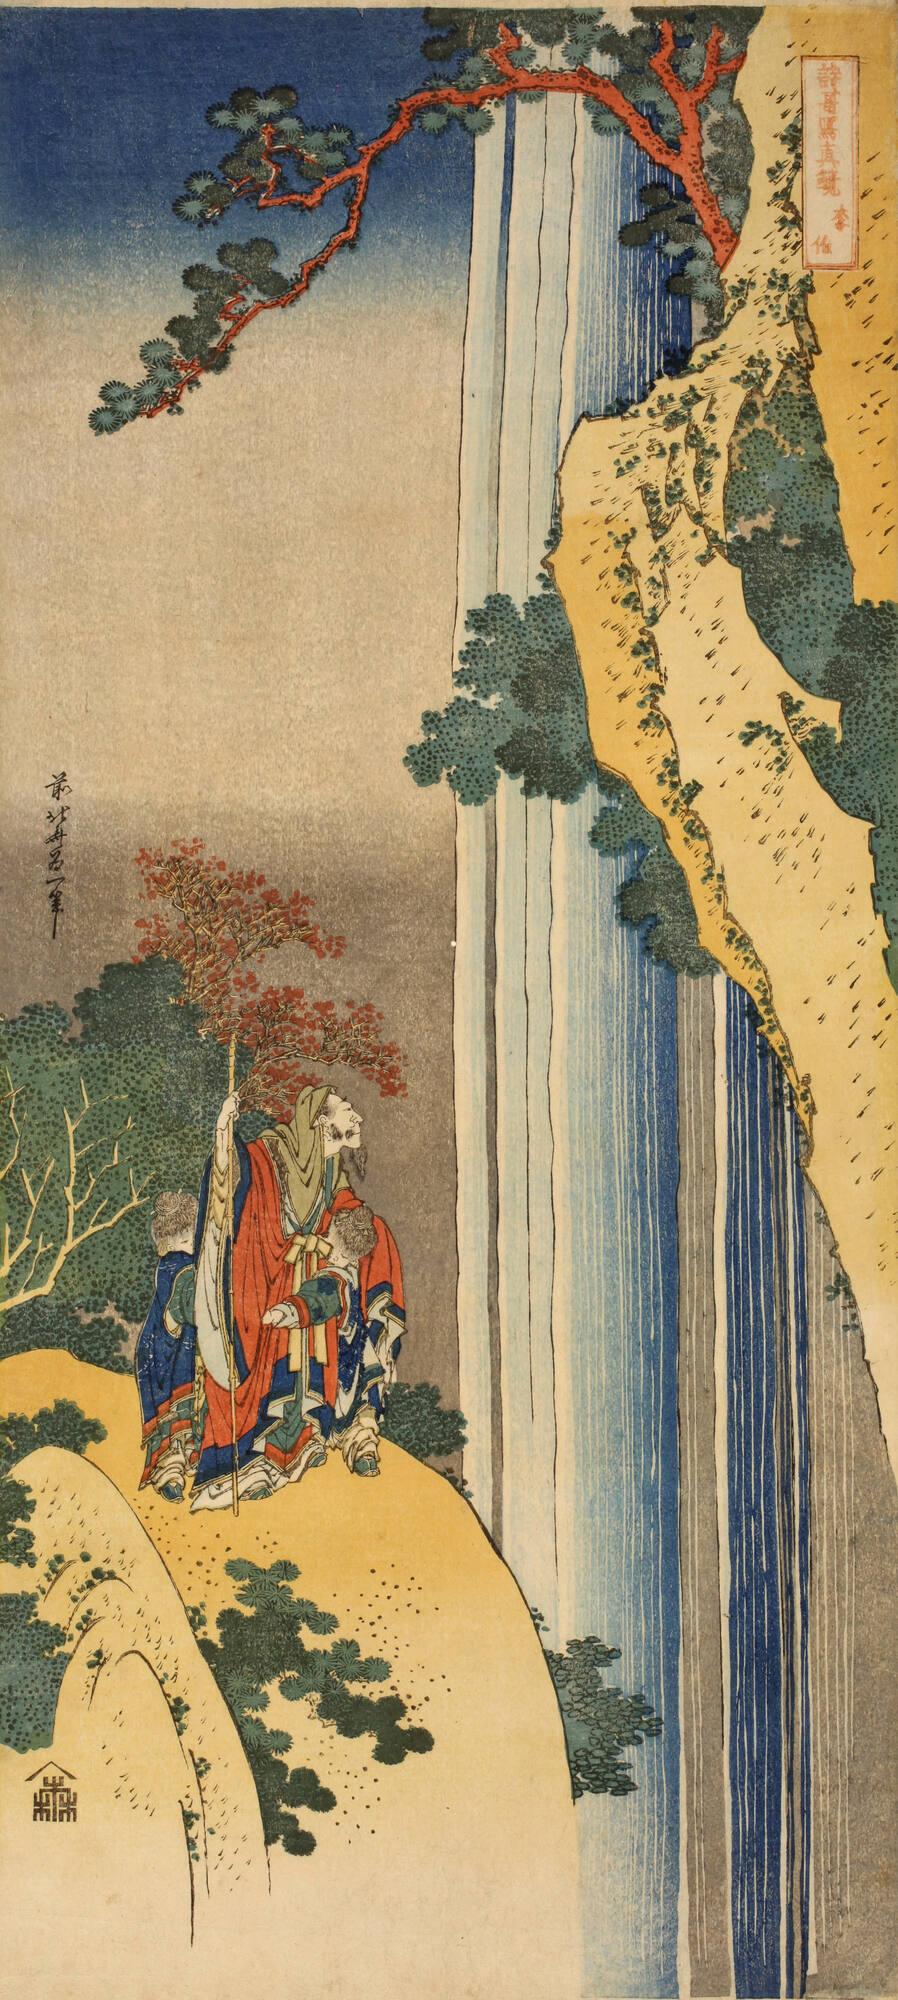 The Chinese Poet Li Bai Viewing a Waterfall, from the series A True Mirror of the Imagery of Chinese and Japanese Poets